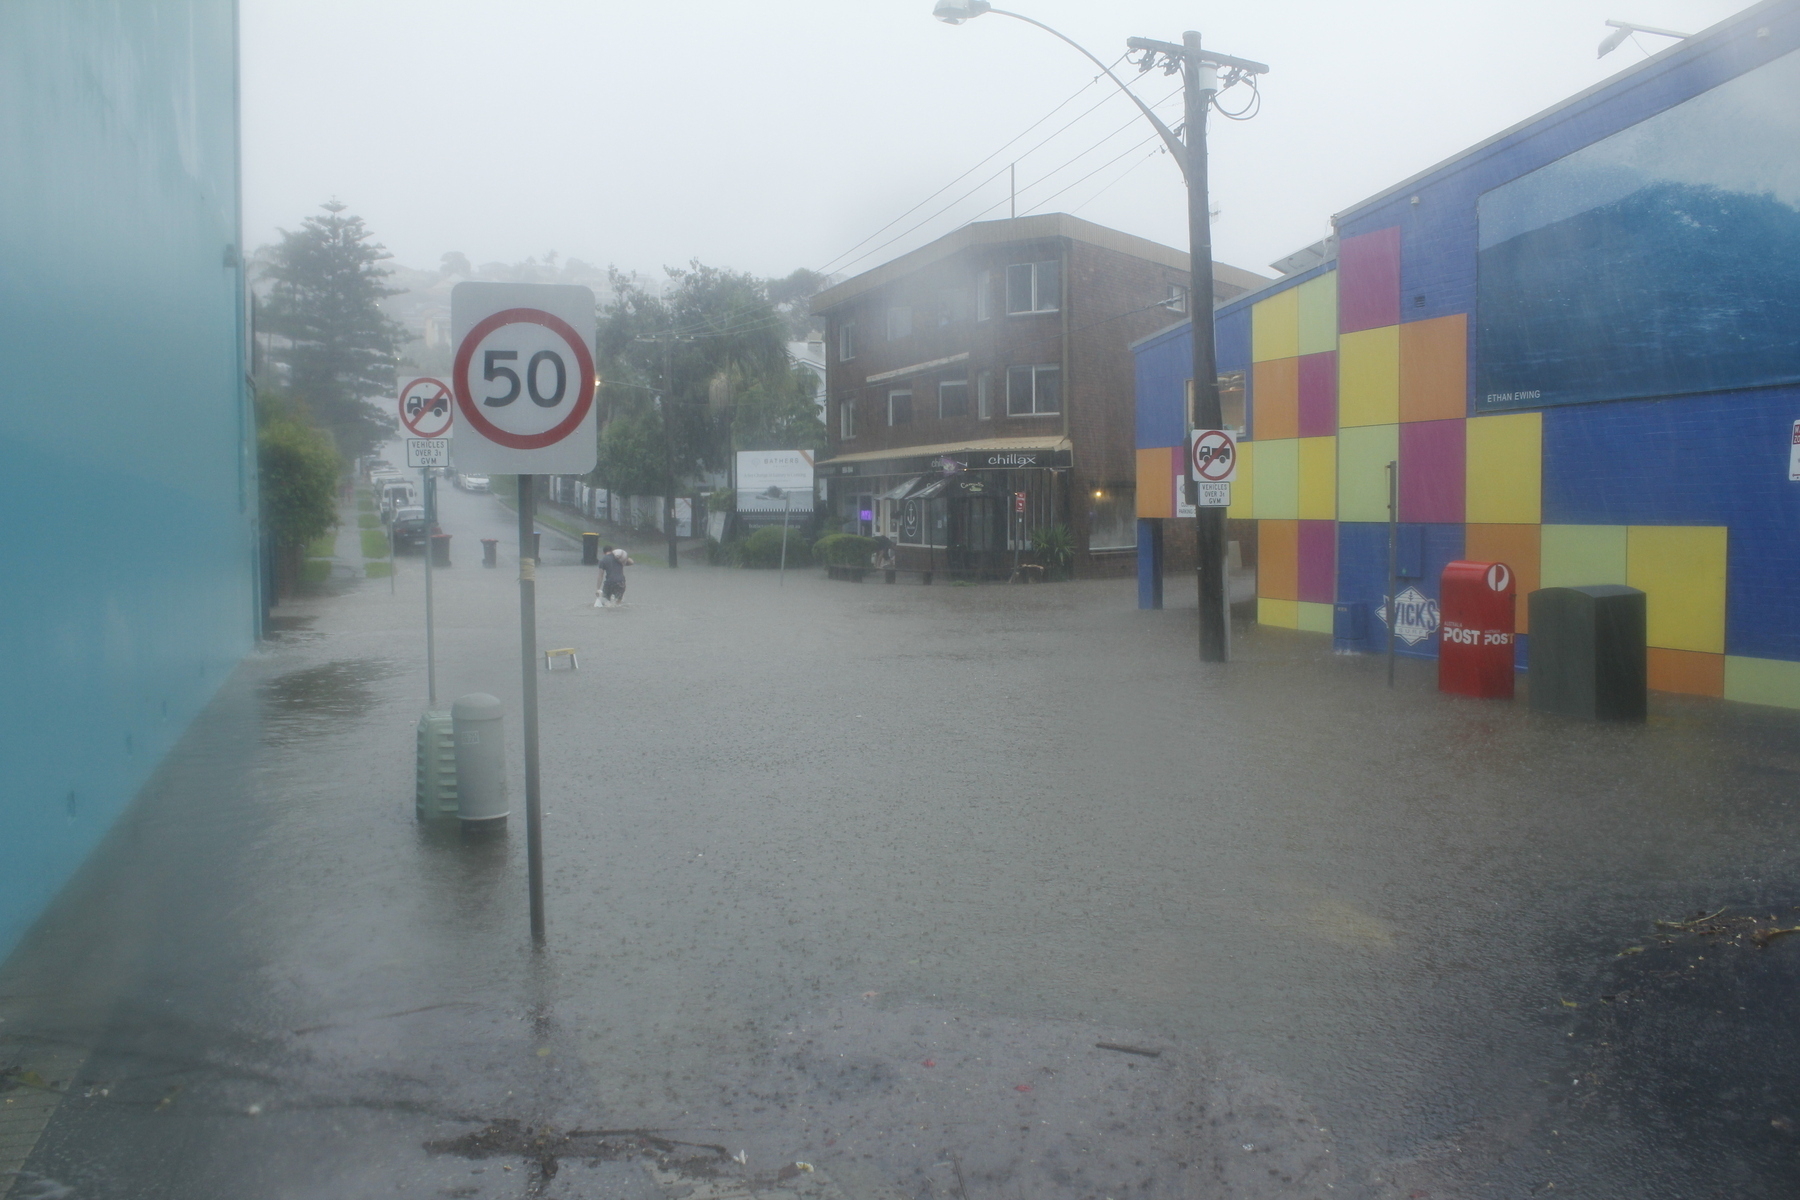 Looking into a street where grey floodwater covers the road surface and both footpaths, forming a lake in which stand traffic signs, street lights, telecom boxes, a street posting box and a step-ladder with only its very top showing above the water. Heavy rain falls on the lake, pitting its surface, and the sky and the ambient light are grey. In the distance a man slogs knee-deep towards a partly-submerged brick building. He has a sandbag on his shoulder, and clutches another bag that’s in the water. Outside the brick building a sign is displayed showing a woman lying on a beach, with the slogan: ‘Bathers - A Sea Change in Luxury is Coming’.